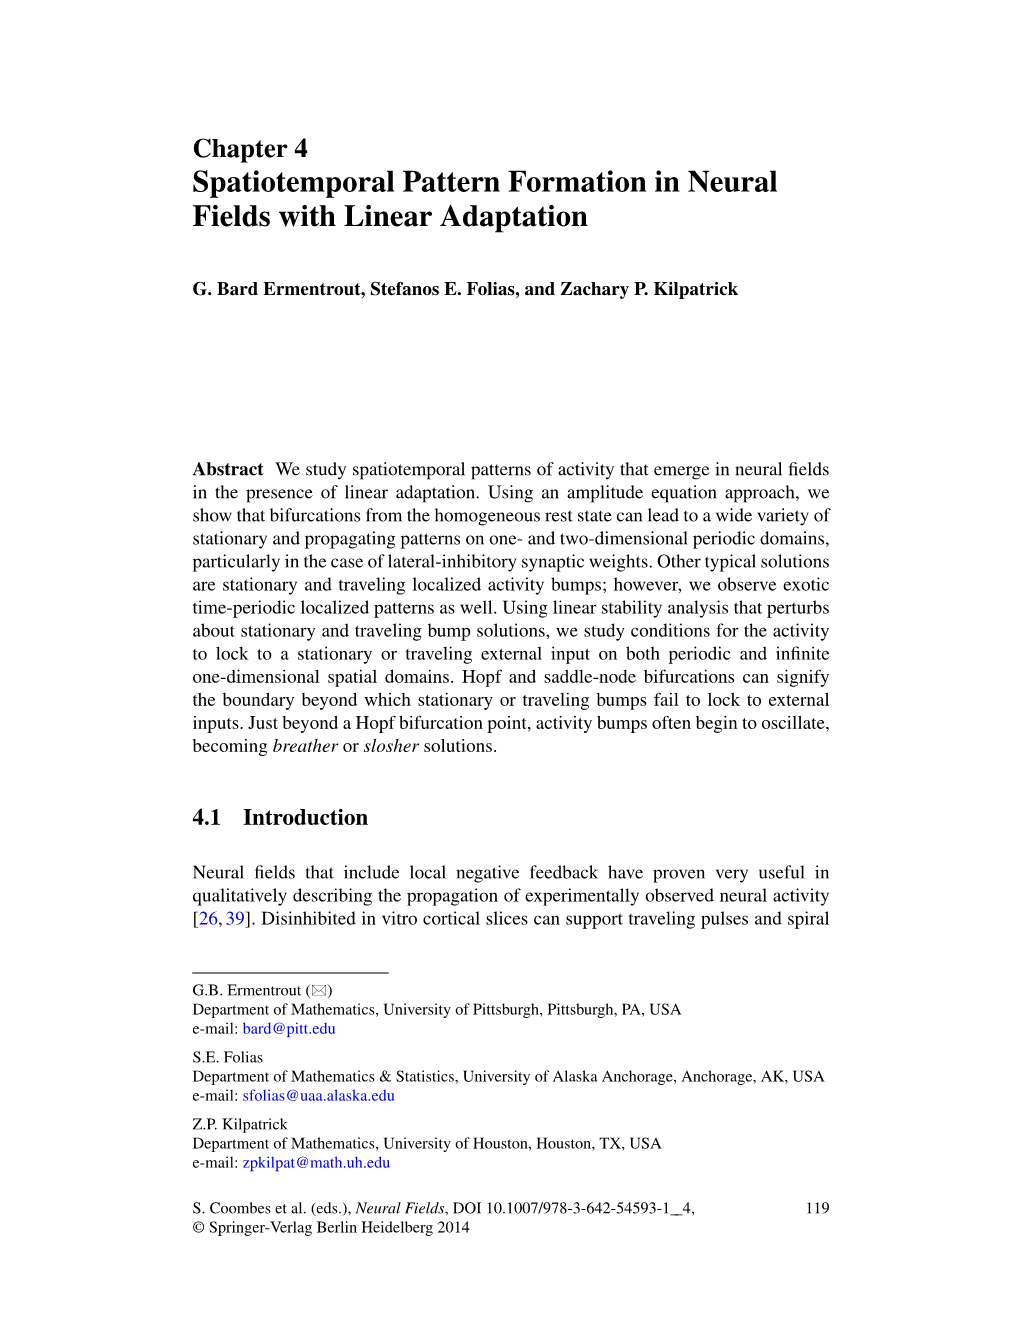 Spatiotemporal Pattern Formation in Neural Fields with Linear Adaptation